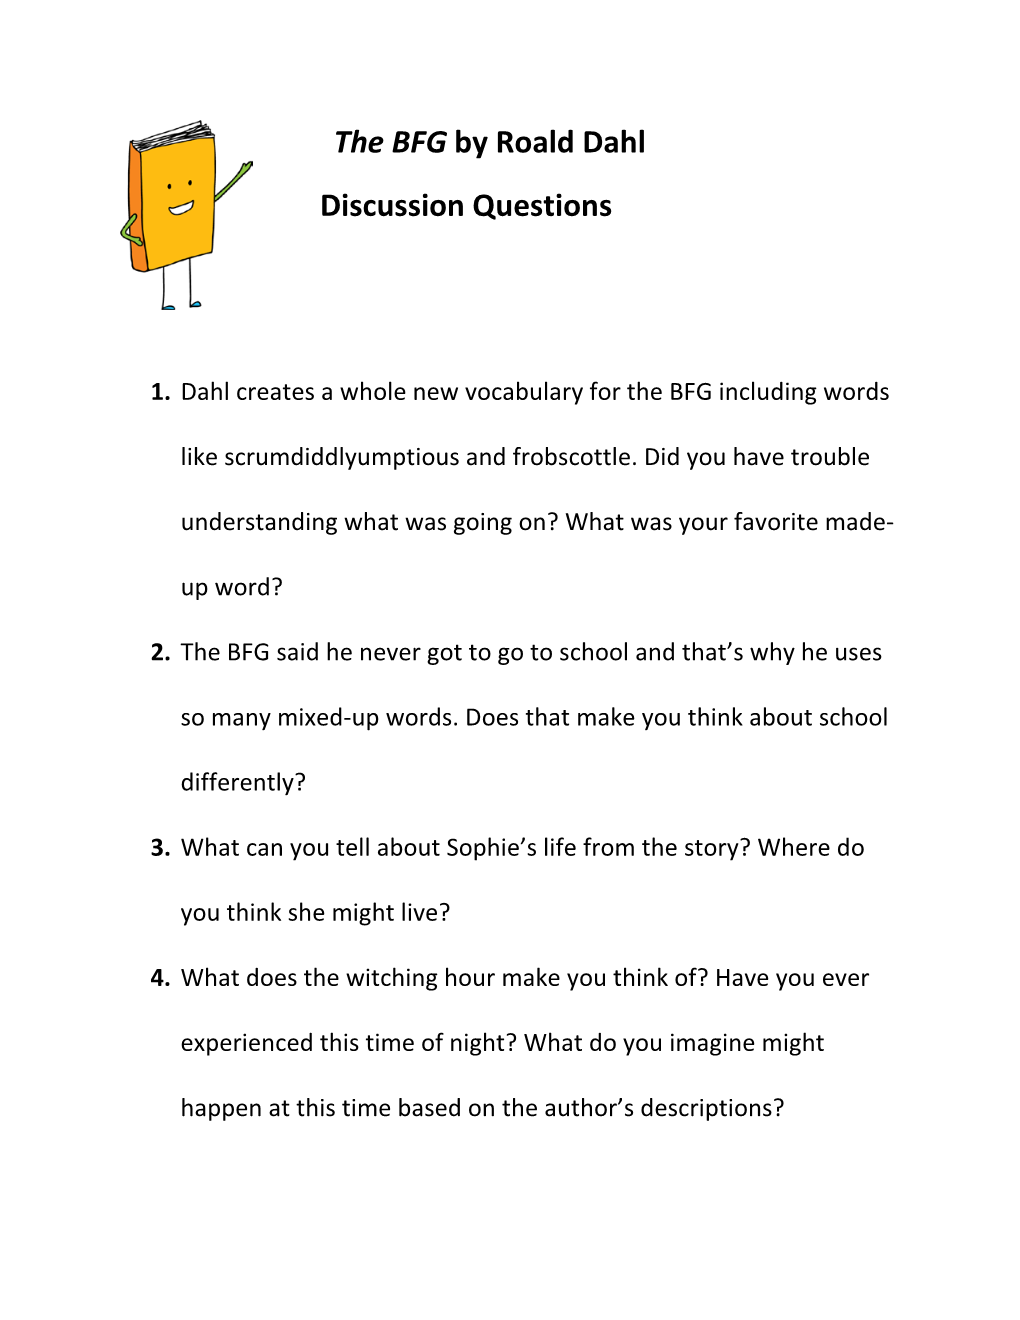 The BFG by Roald Dahl Discussion Questions